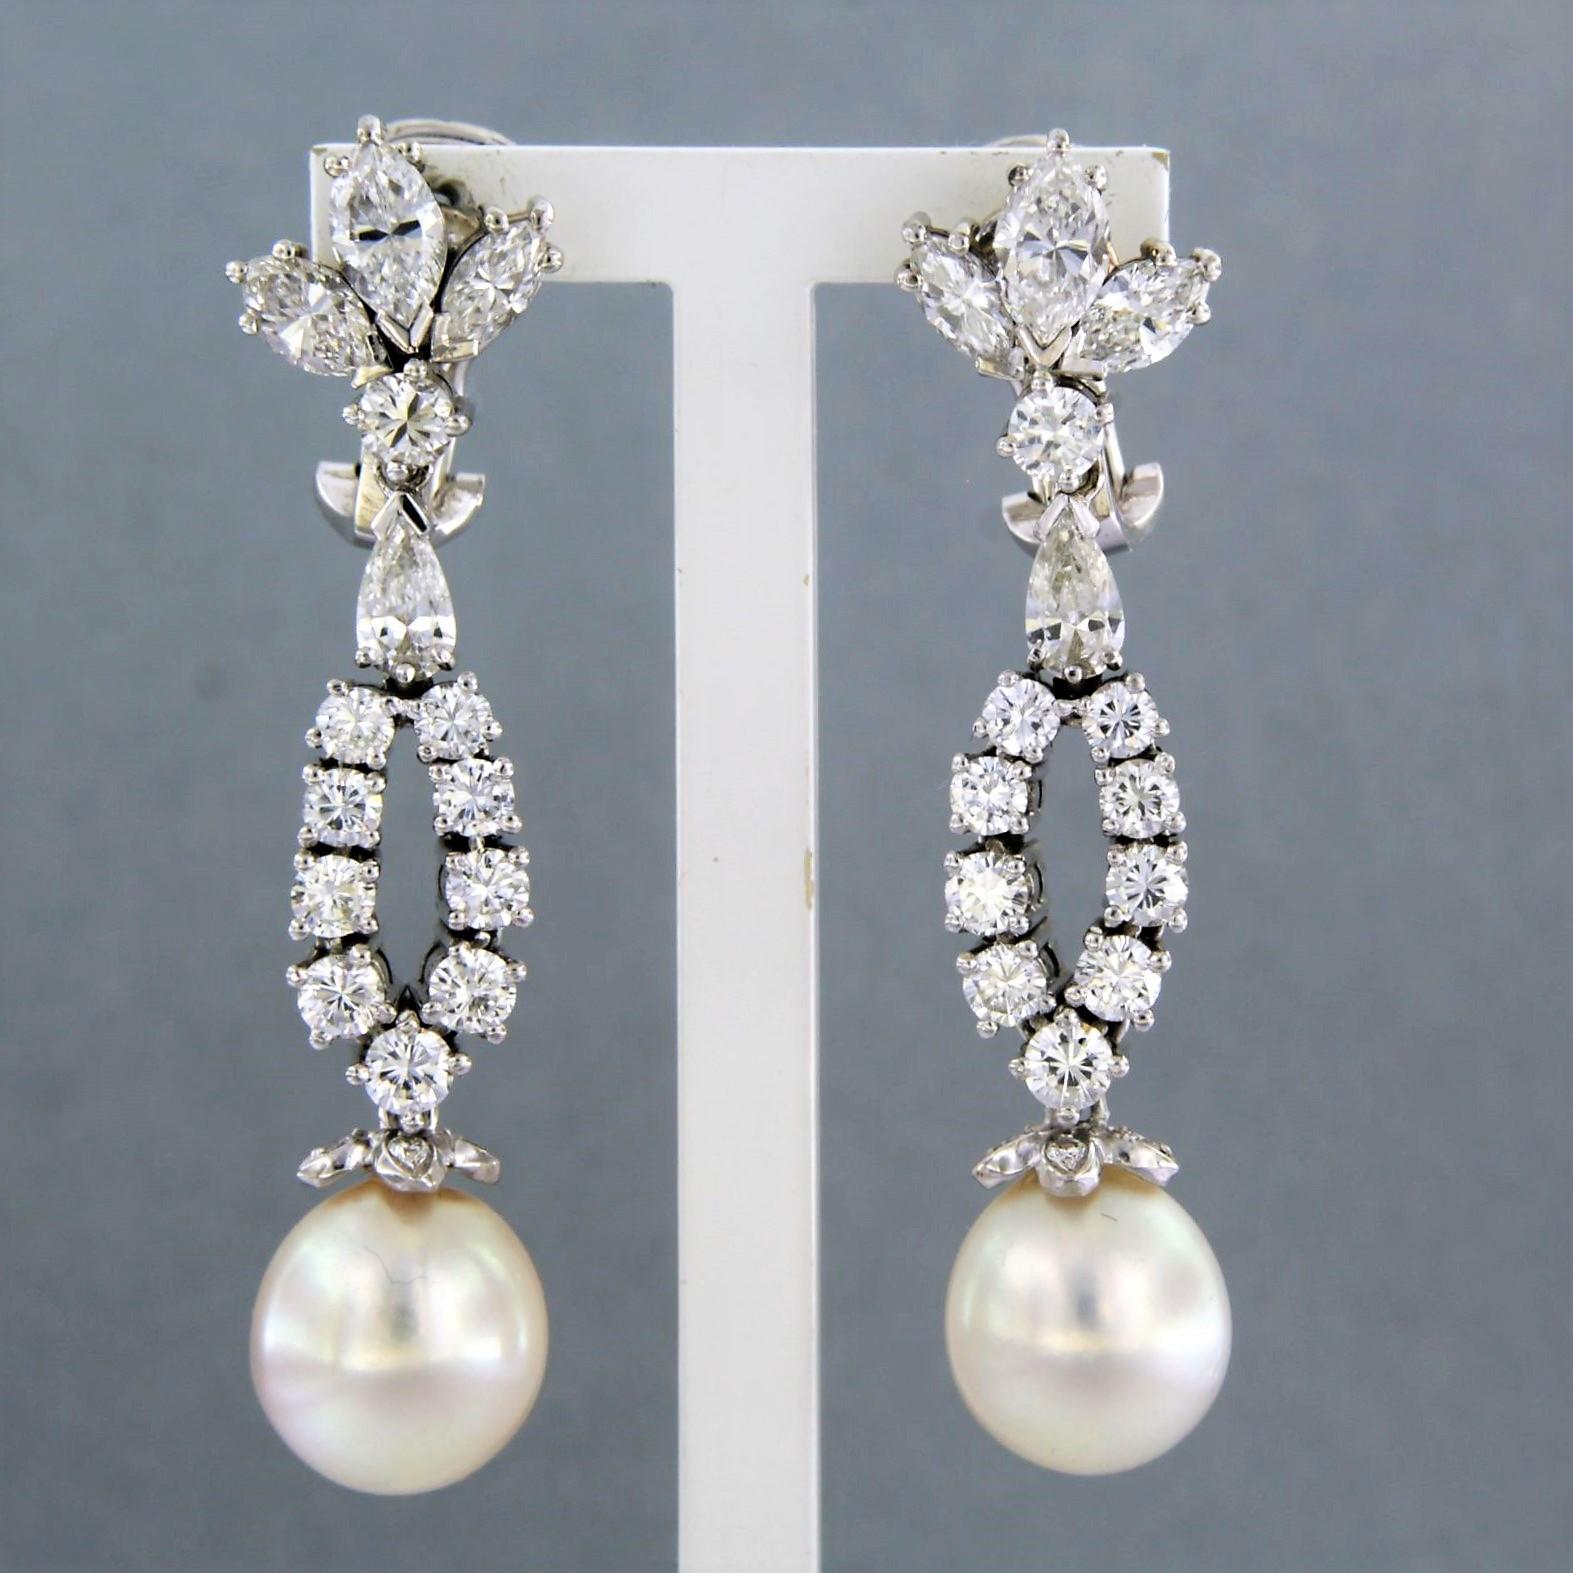 18k white gold earrings set with pearl and various shapes of brilliant cut diamond 4.00 ct - F/G - VS/SI

detailed description:

the size of the earring is 4.5 cm long by 1.1 cm wide

weight 14.7 grams

set with

- 2 x 1.0 cm freshwater cultured